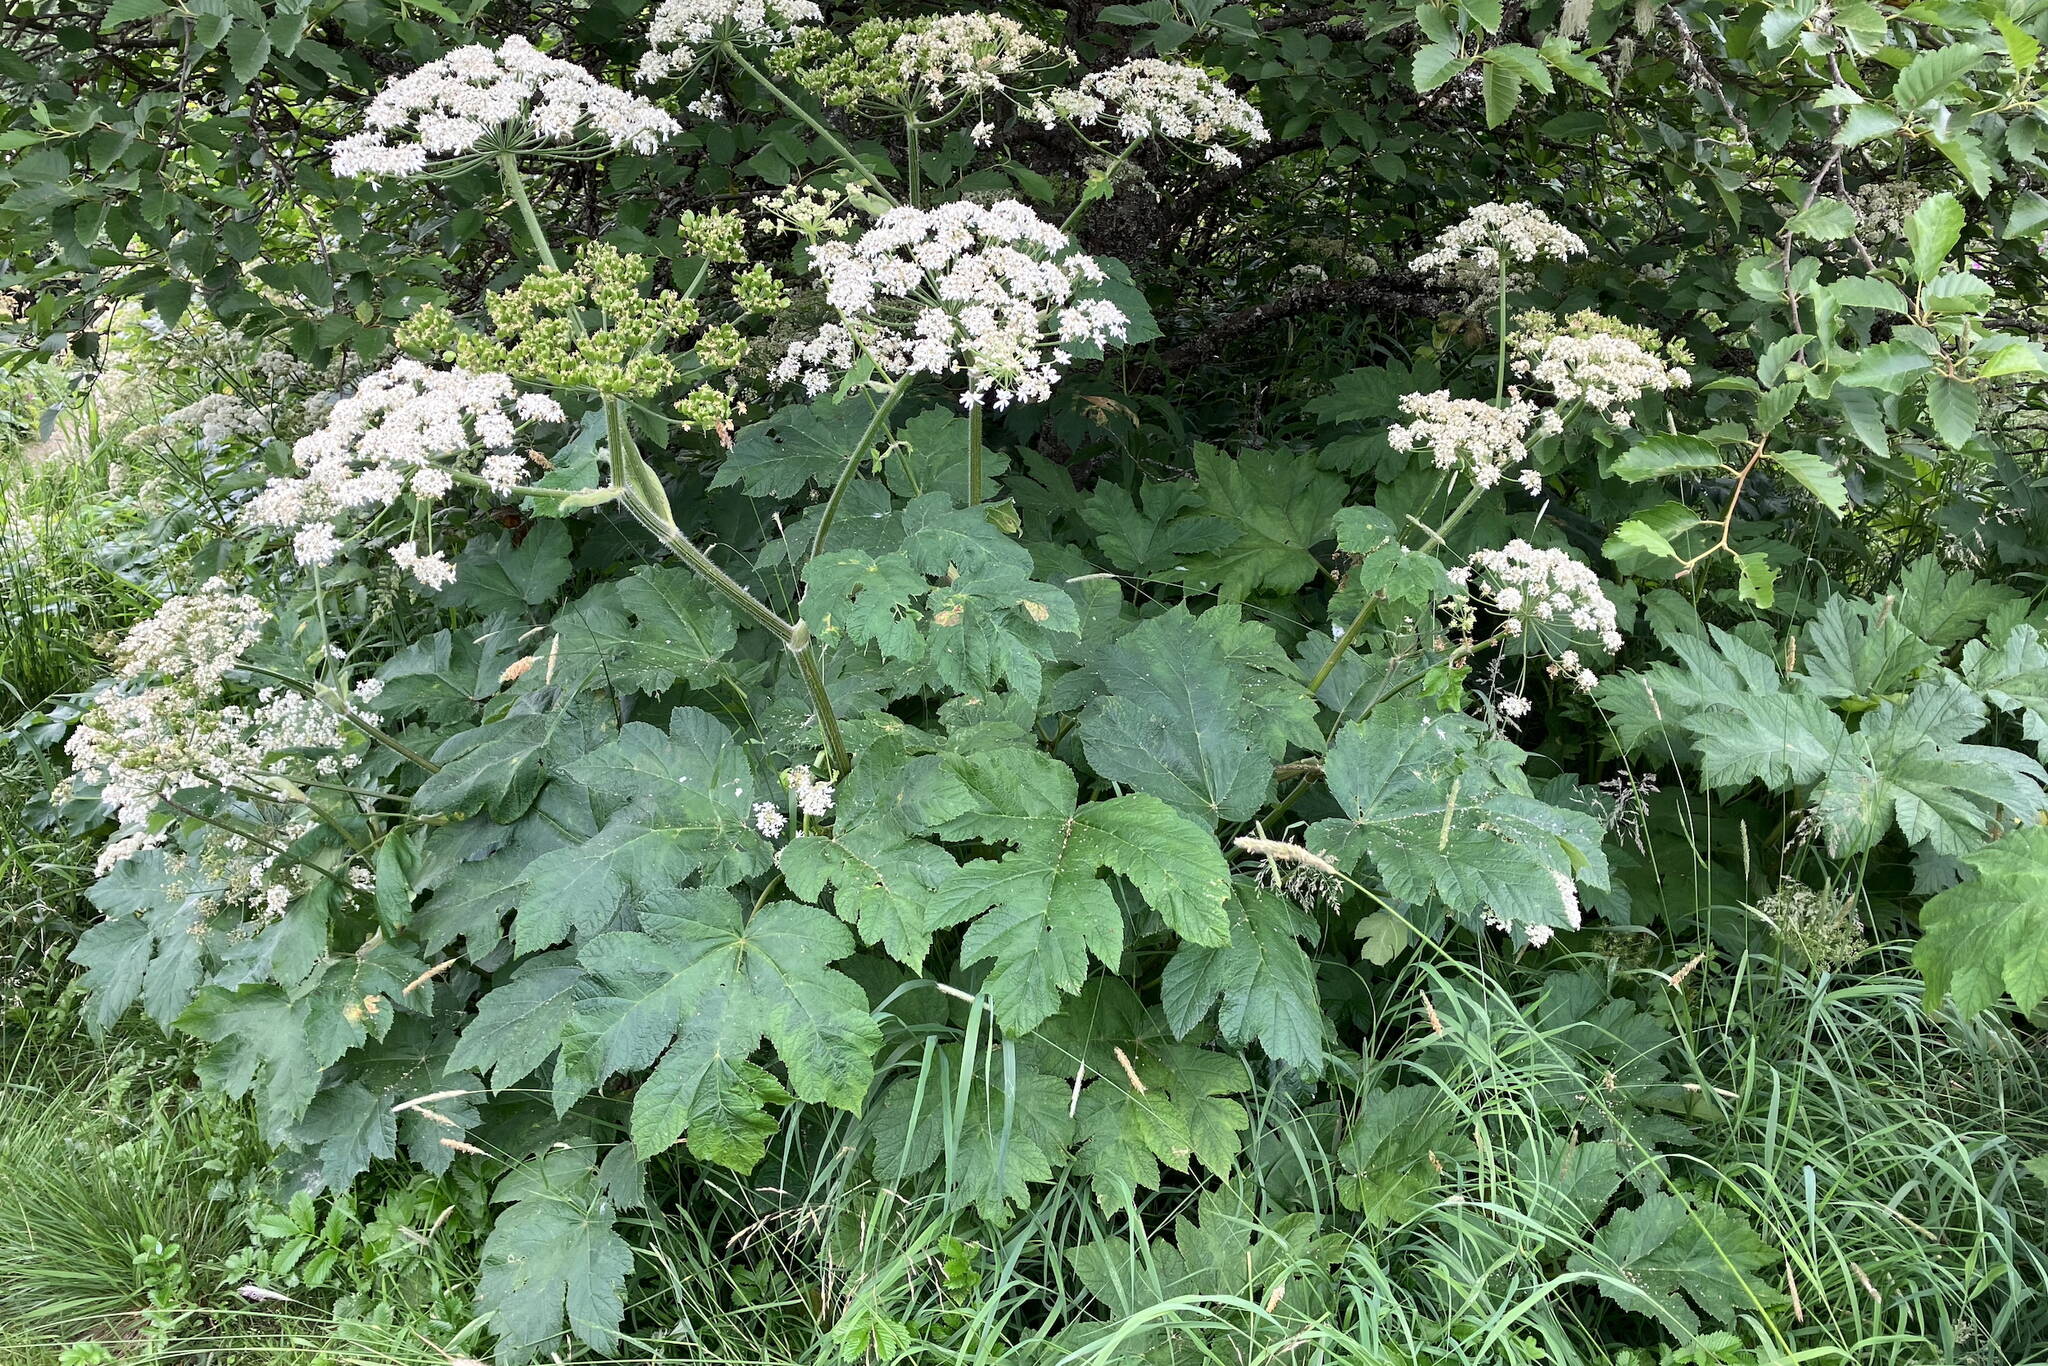 Cow parsnip, also known as Indian rhubarb, is common along Juneau’s trails. (Photo by Mary F. Willson)